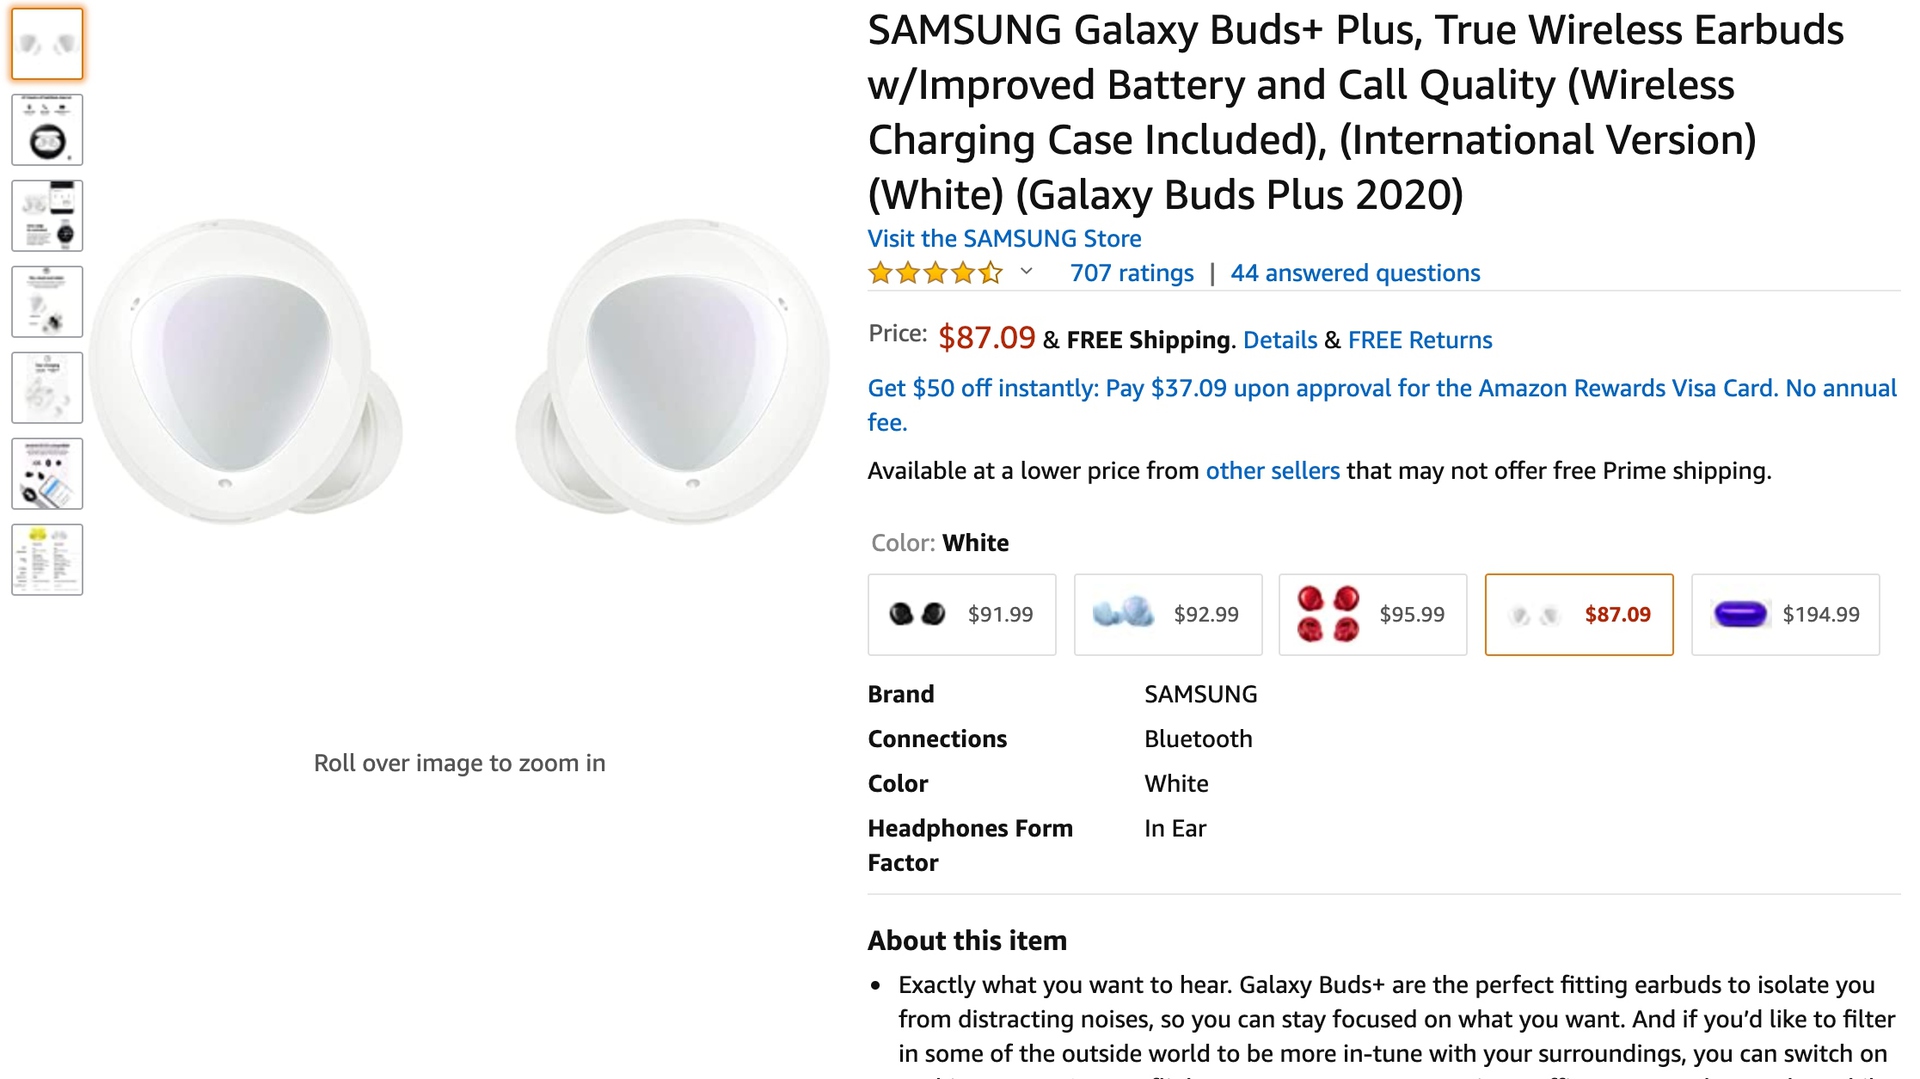 Samsung Galaxy Buds Plus Amazon Prime Day 2020 Deal